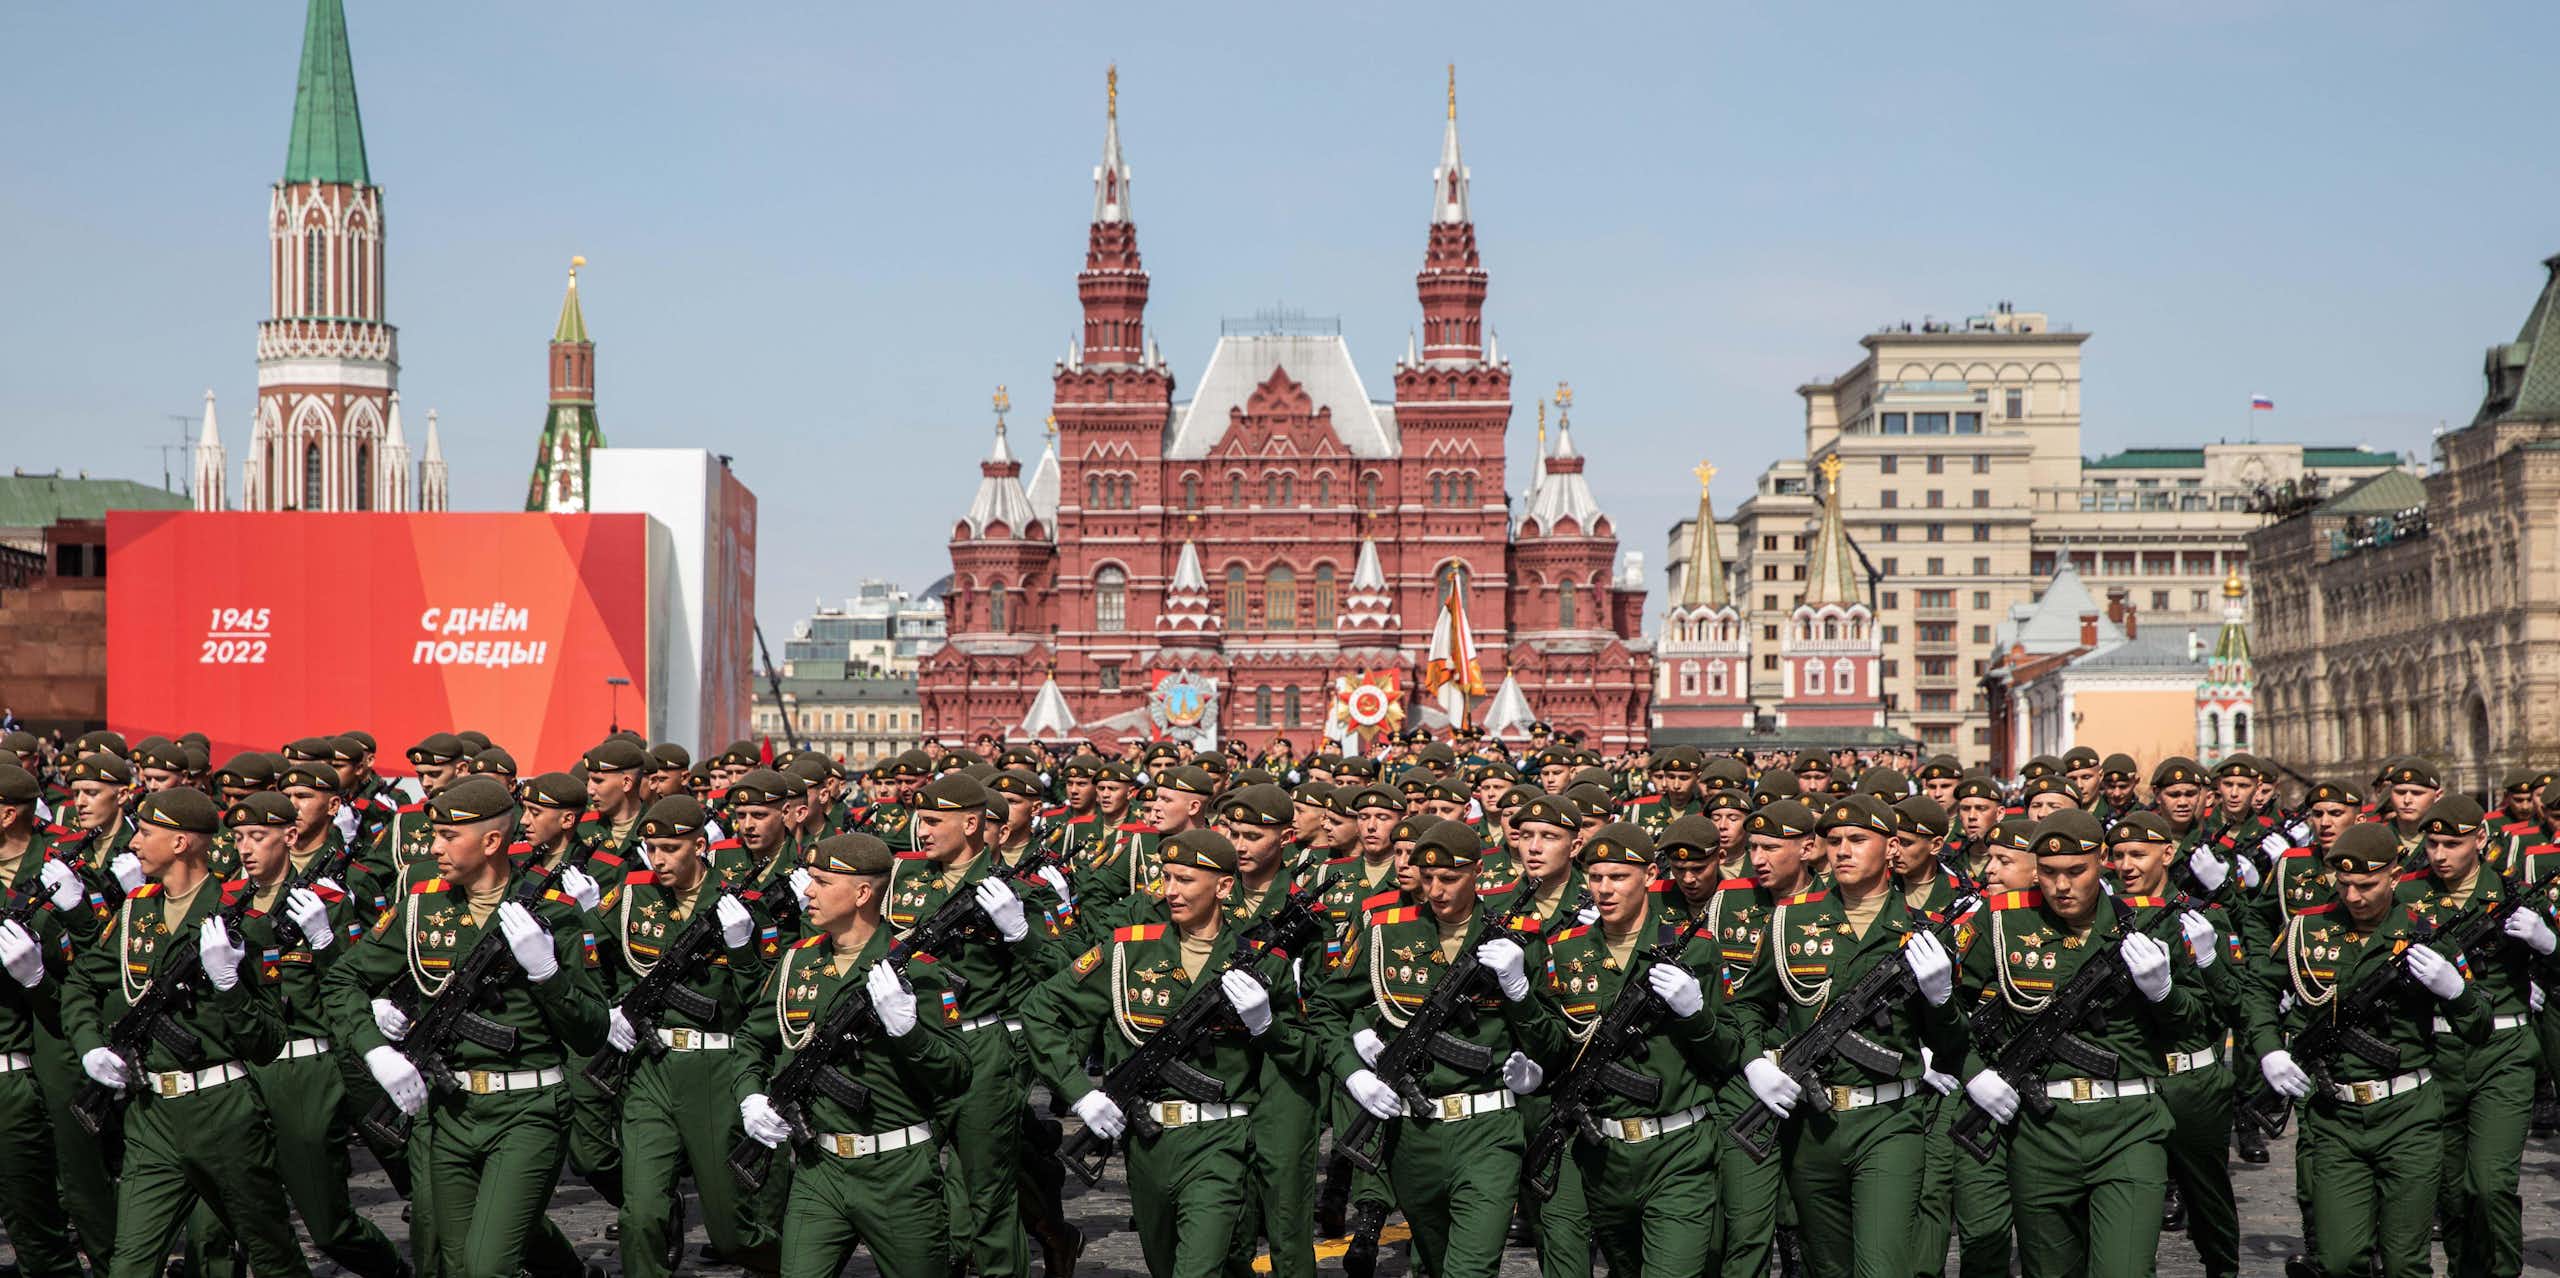 Soldiers in green, with Red Square buildings in background.